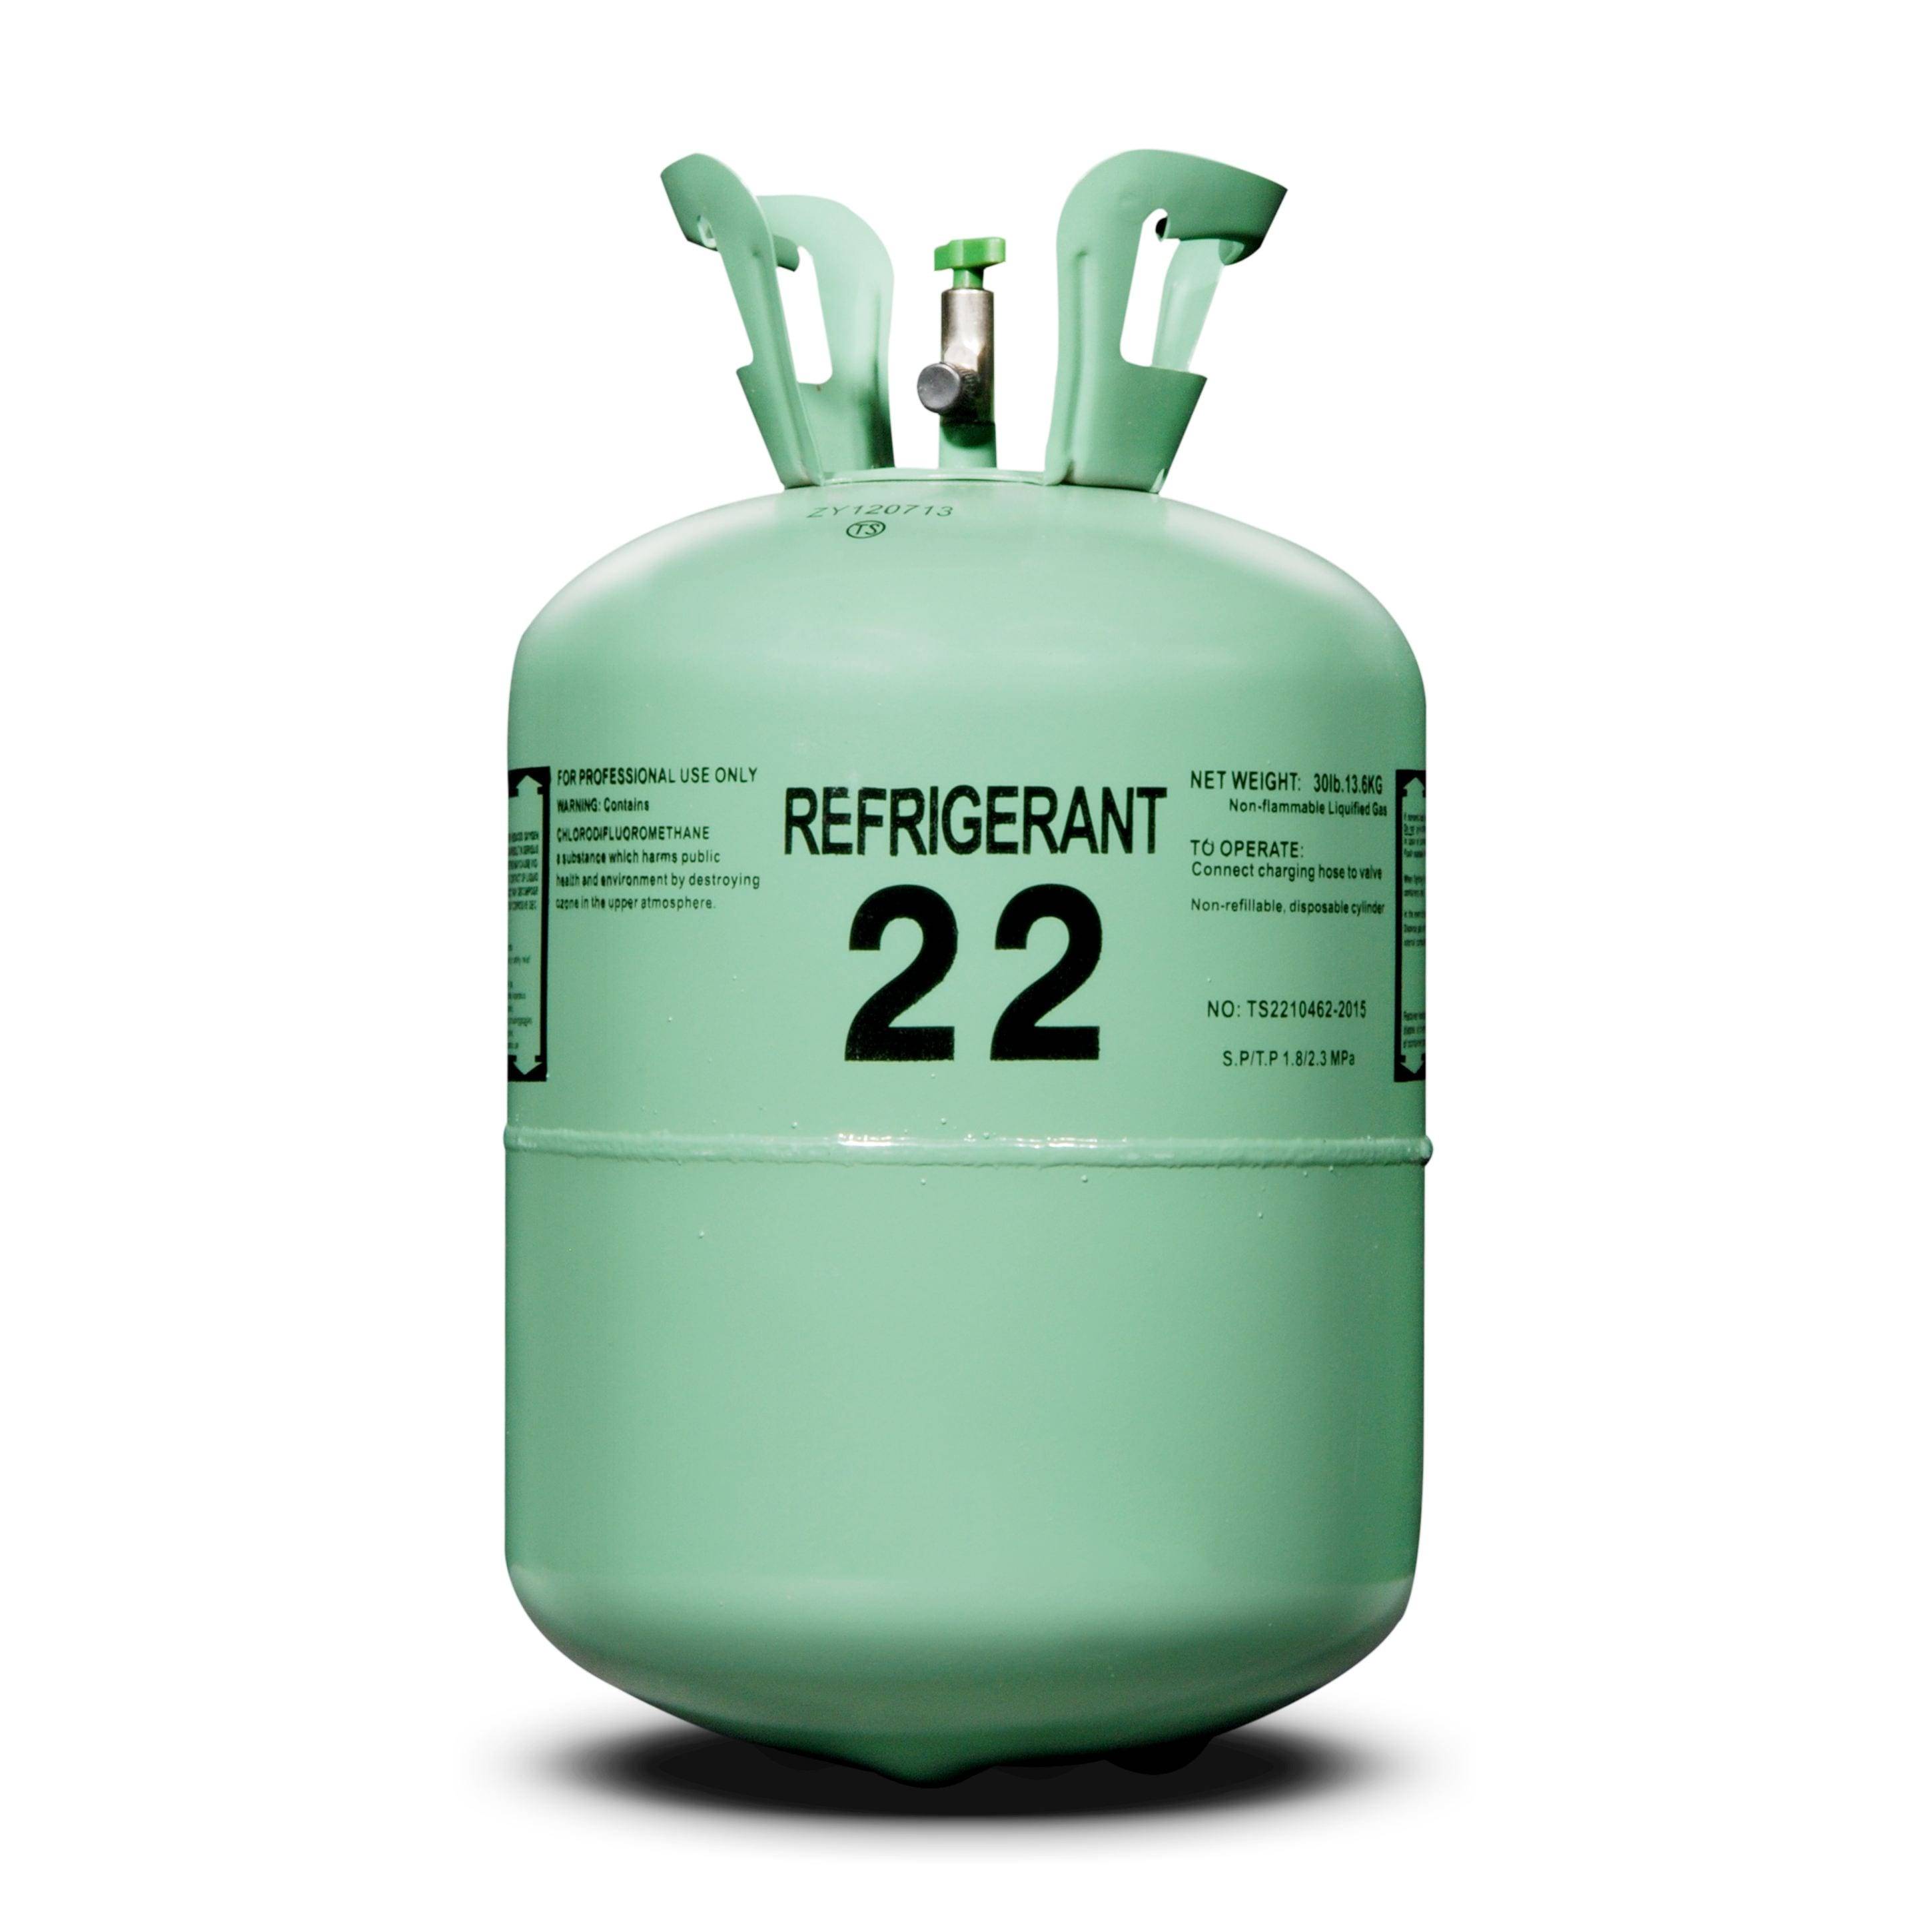 Characteristics of commonly used refrigerants